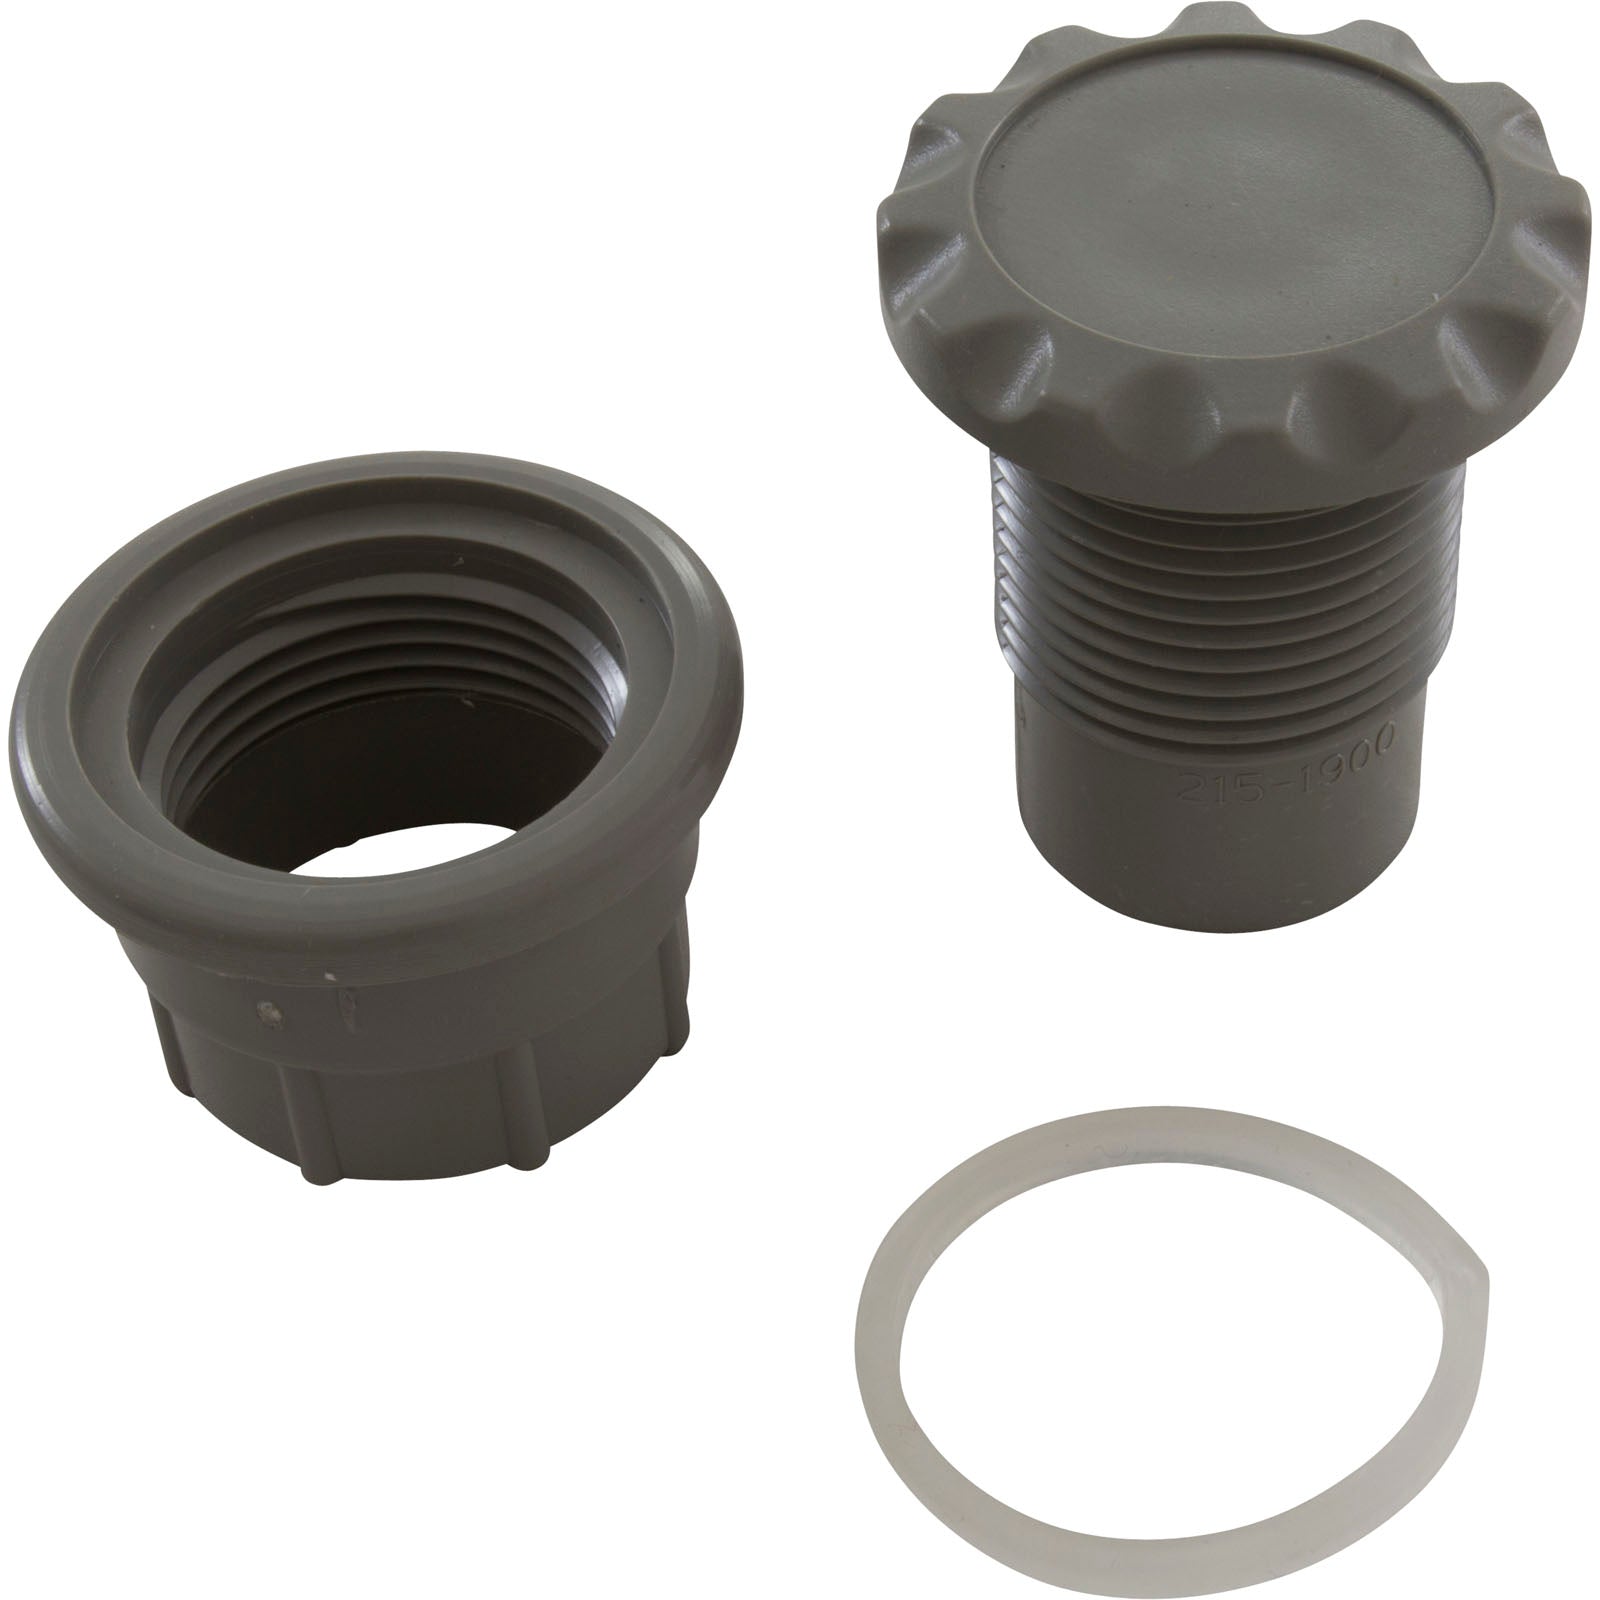 Waterway Gunite Air Control "A" Style (Fits Inside 1.5" Pipe Or 1/2" Slip) [Gray] (660-3407)